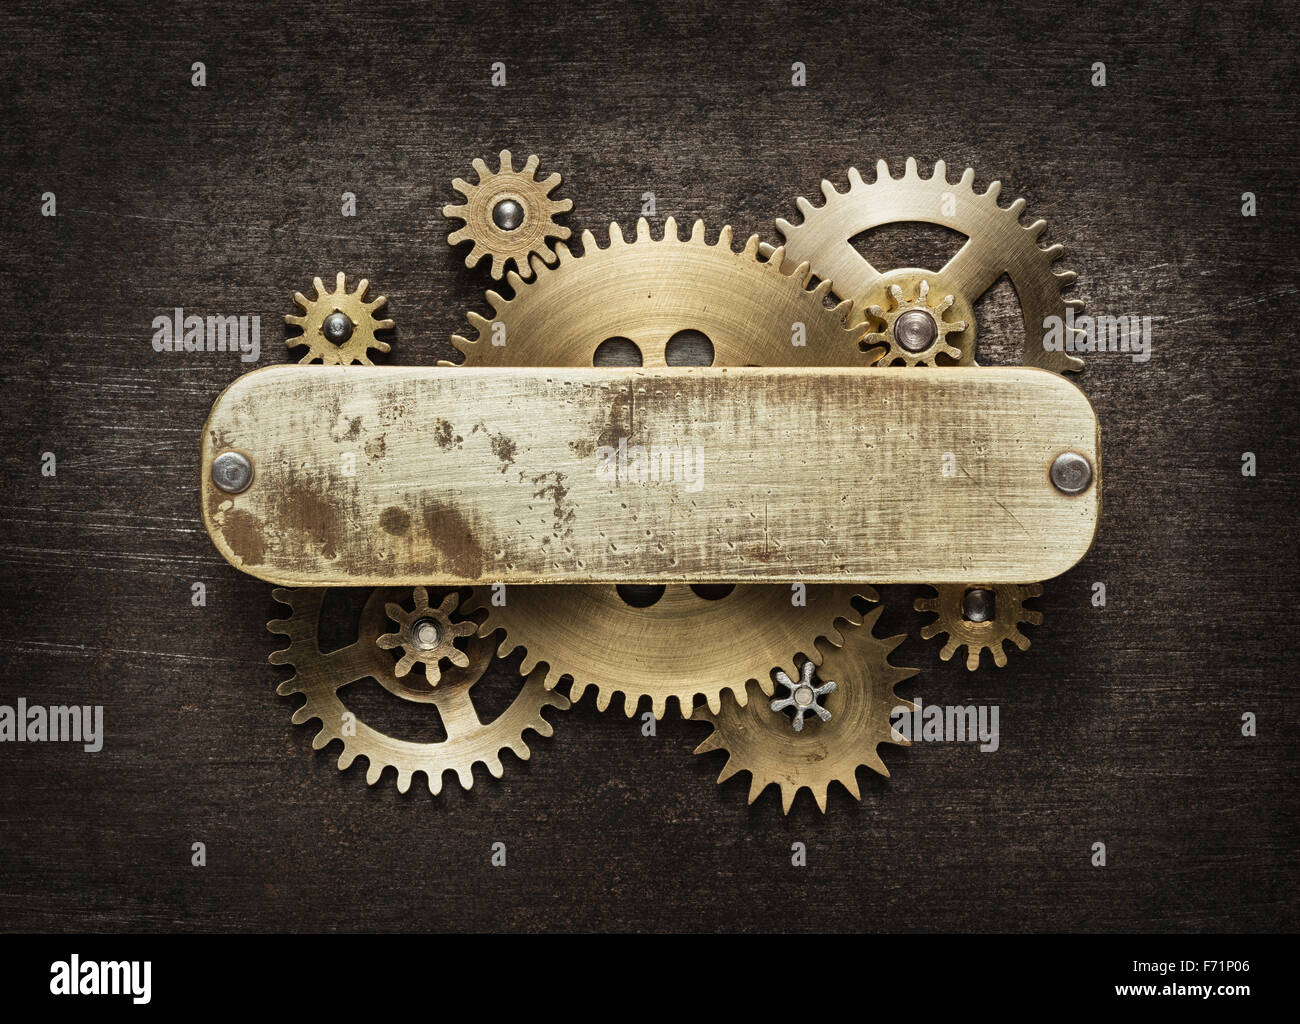 Clockwork mechanism background made of metal gears and brass plate. Stock Photo